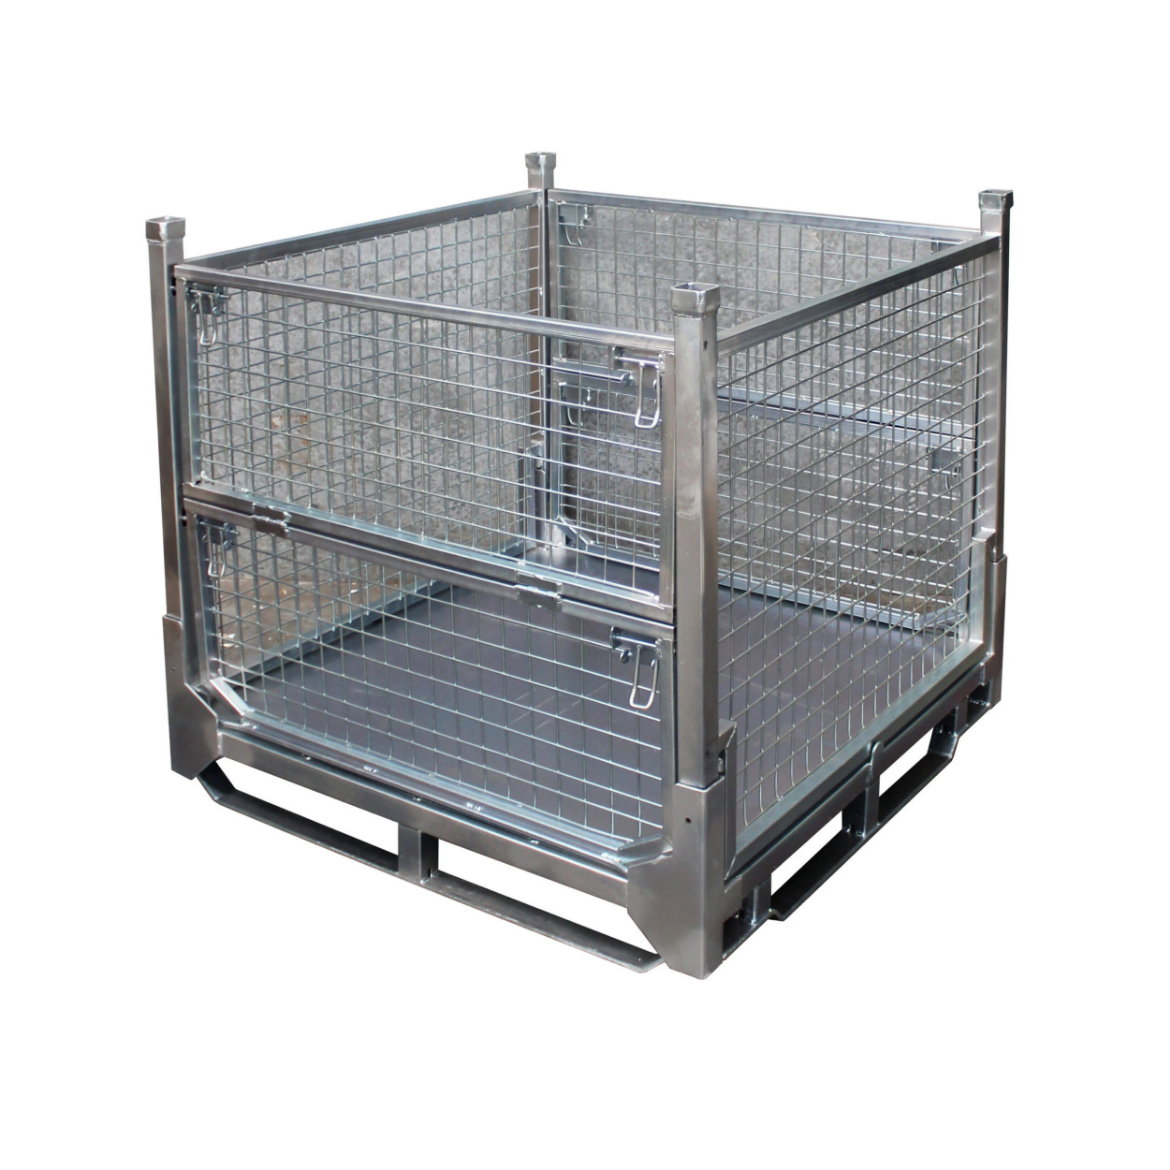 Picture of Stillage Mesh Cage (1150mm Long x 1150mm Wide x 1120mm High)